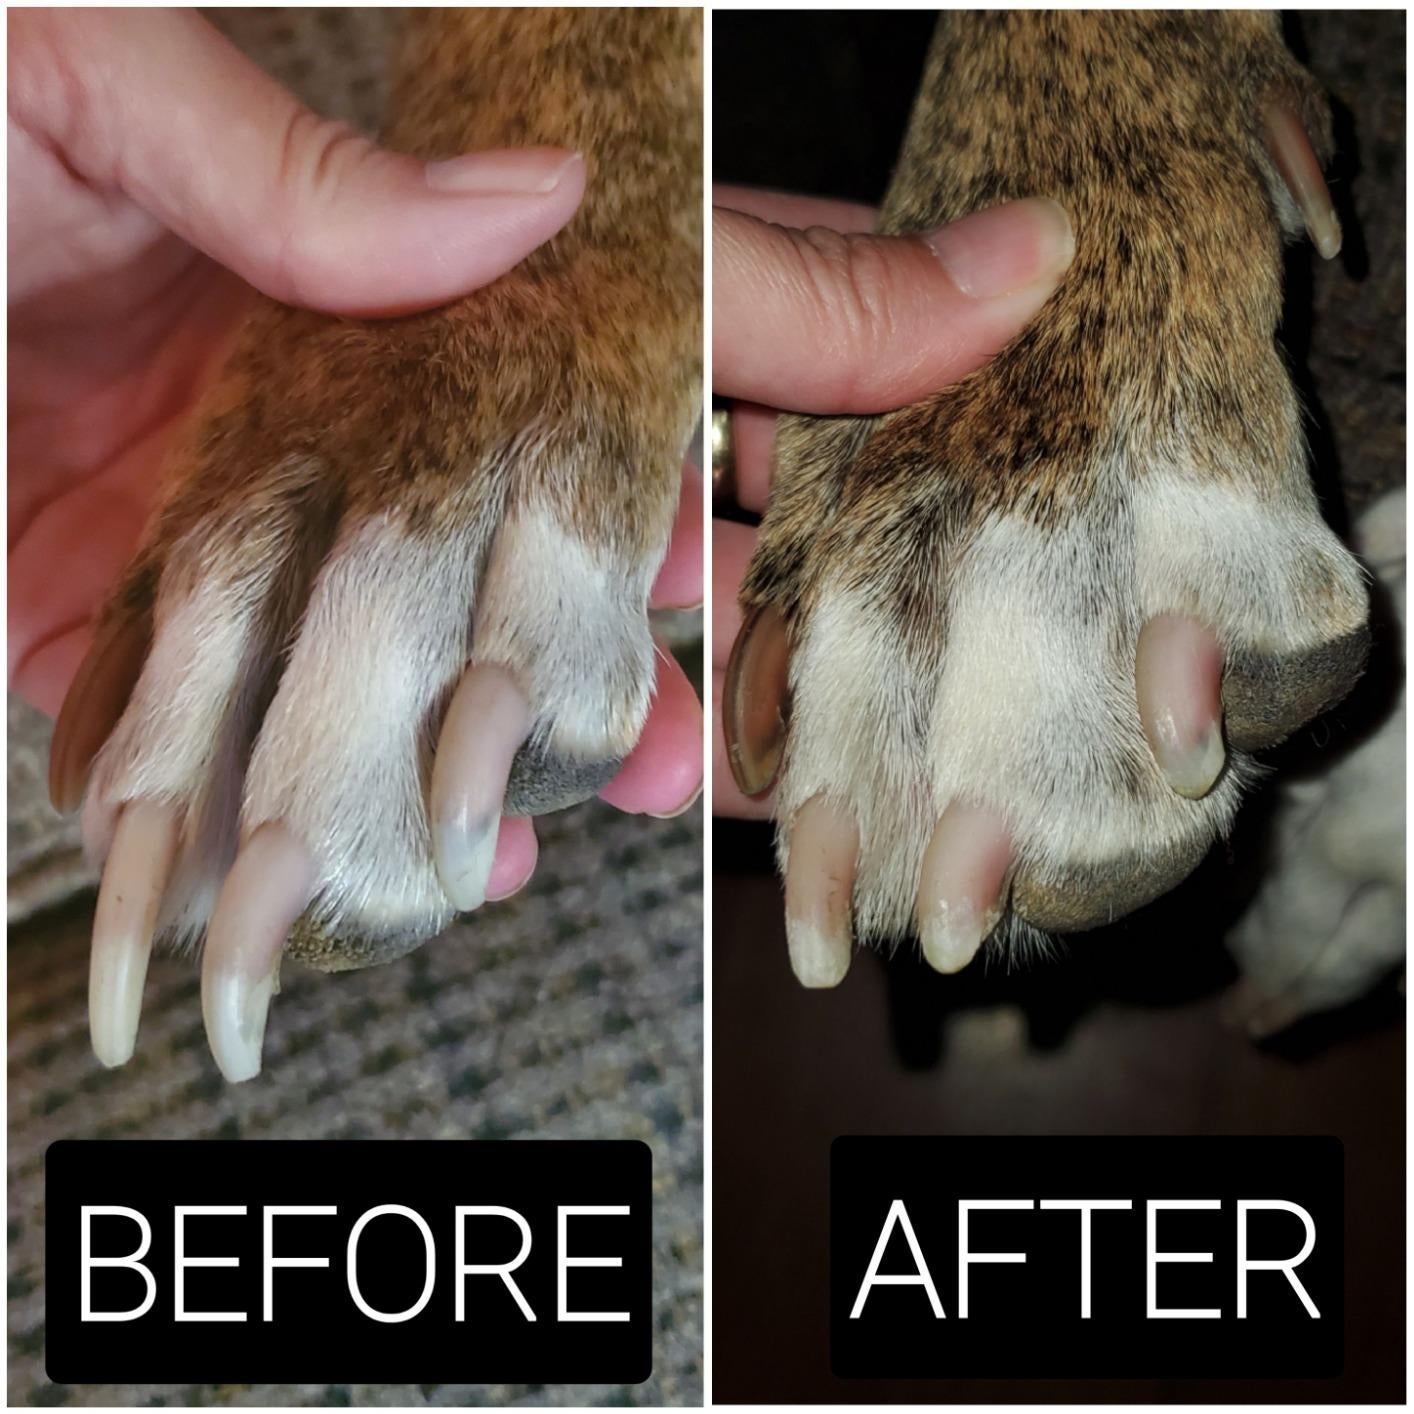 before photo of a dog's overgrown nails next to an after photo of the same dog's shorter nails that have been ground down